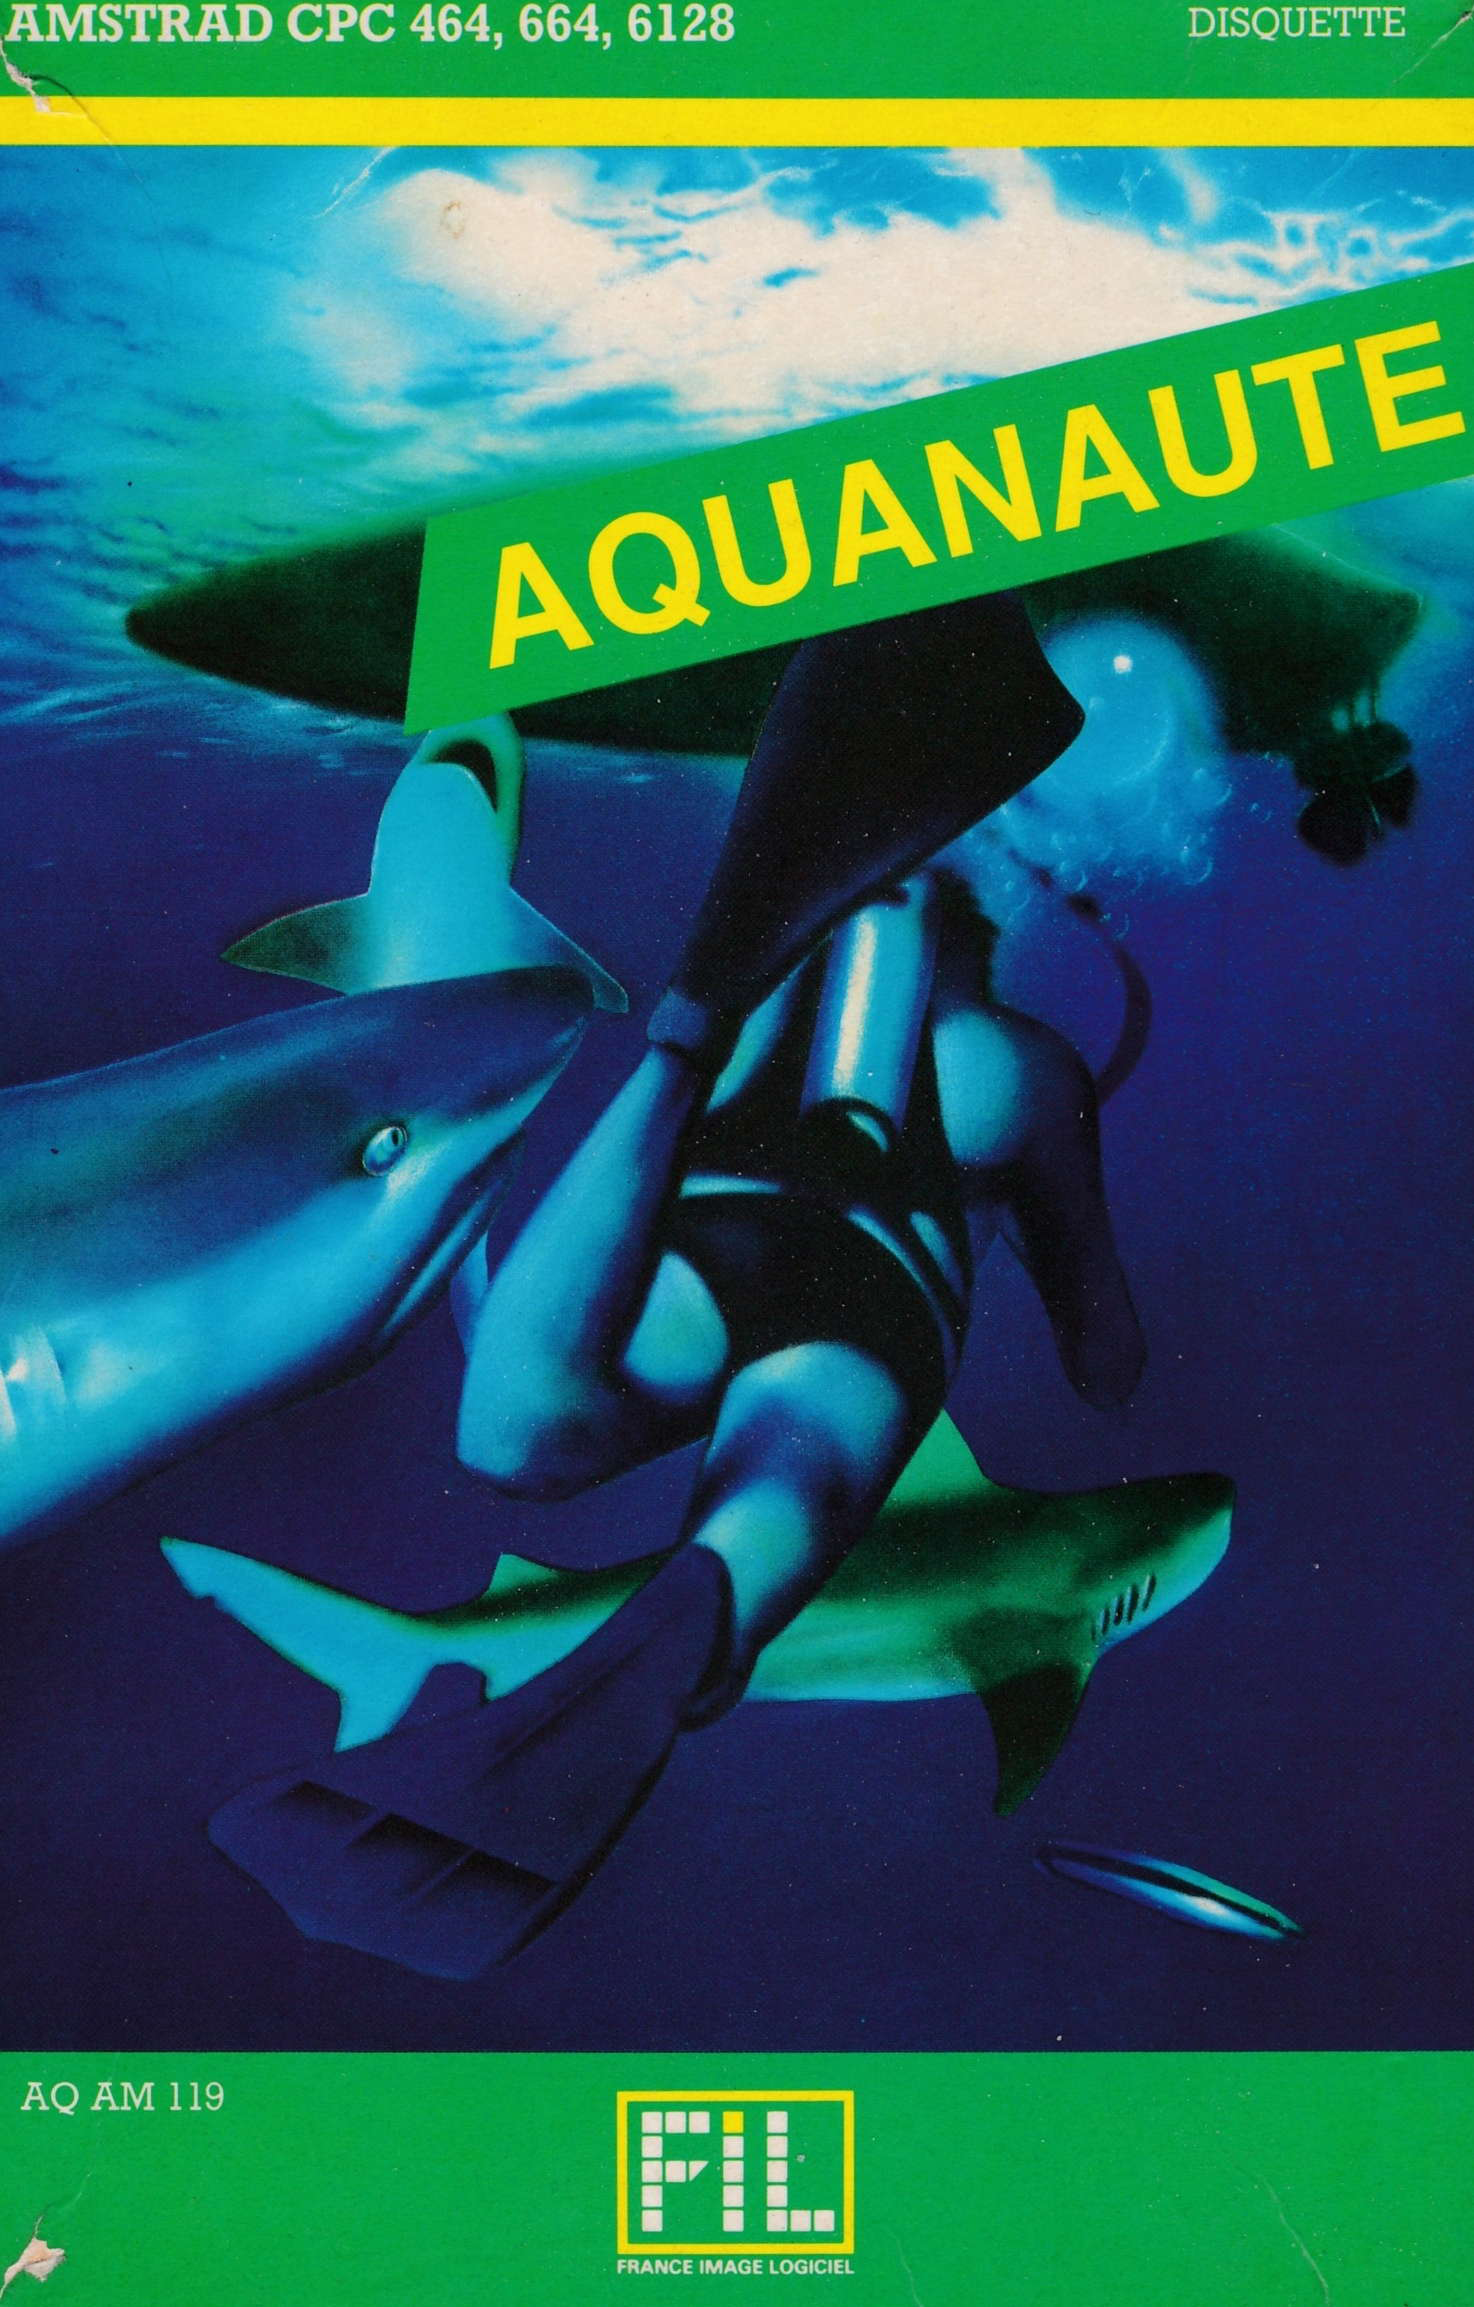 cover of the Amstrad CPC game Aquanaute  by GameBase CPC